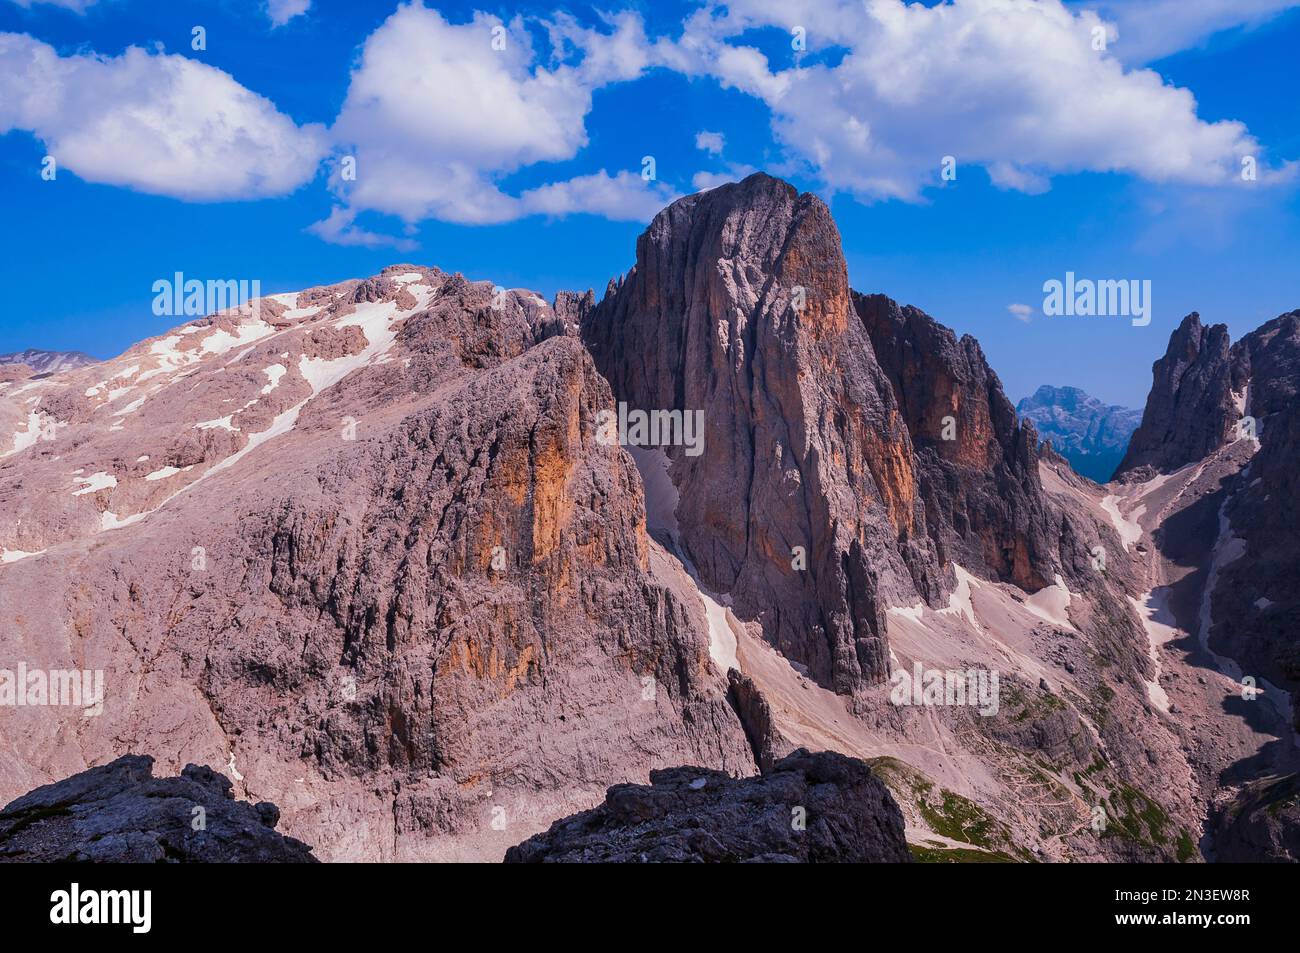 Rocky summit in the Pale di San Martino (Pala Group) at San Martino di Castrozza in the Primiero Valley of the Trentino Province with a blue sky Stock Photo